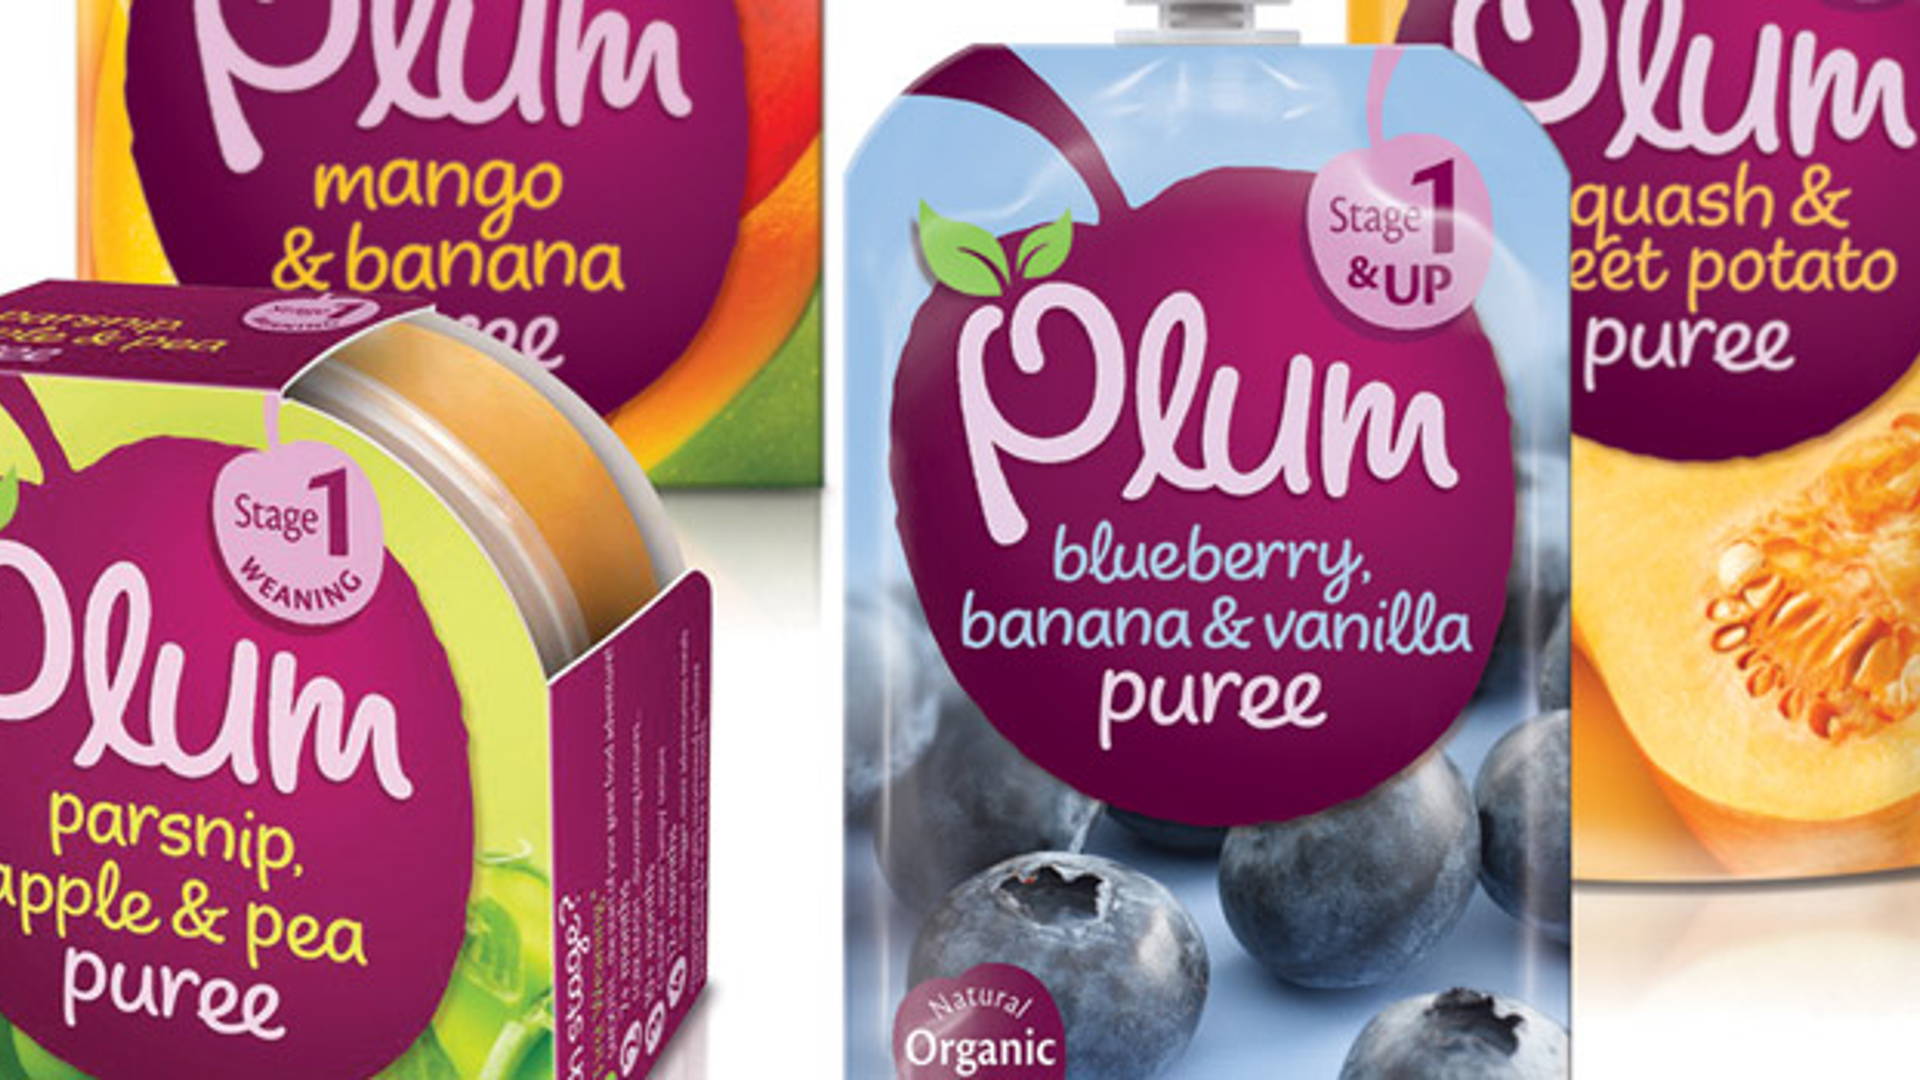 Featured image for Plum